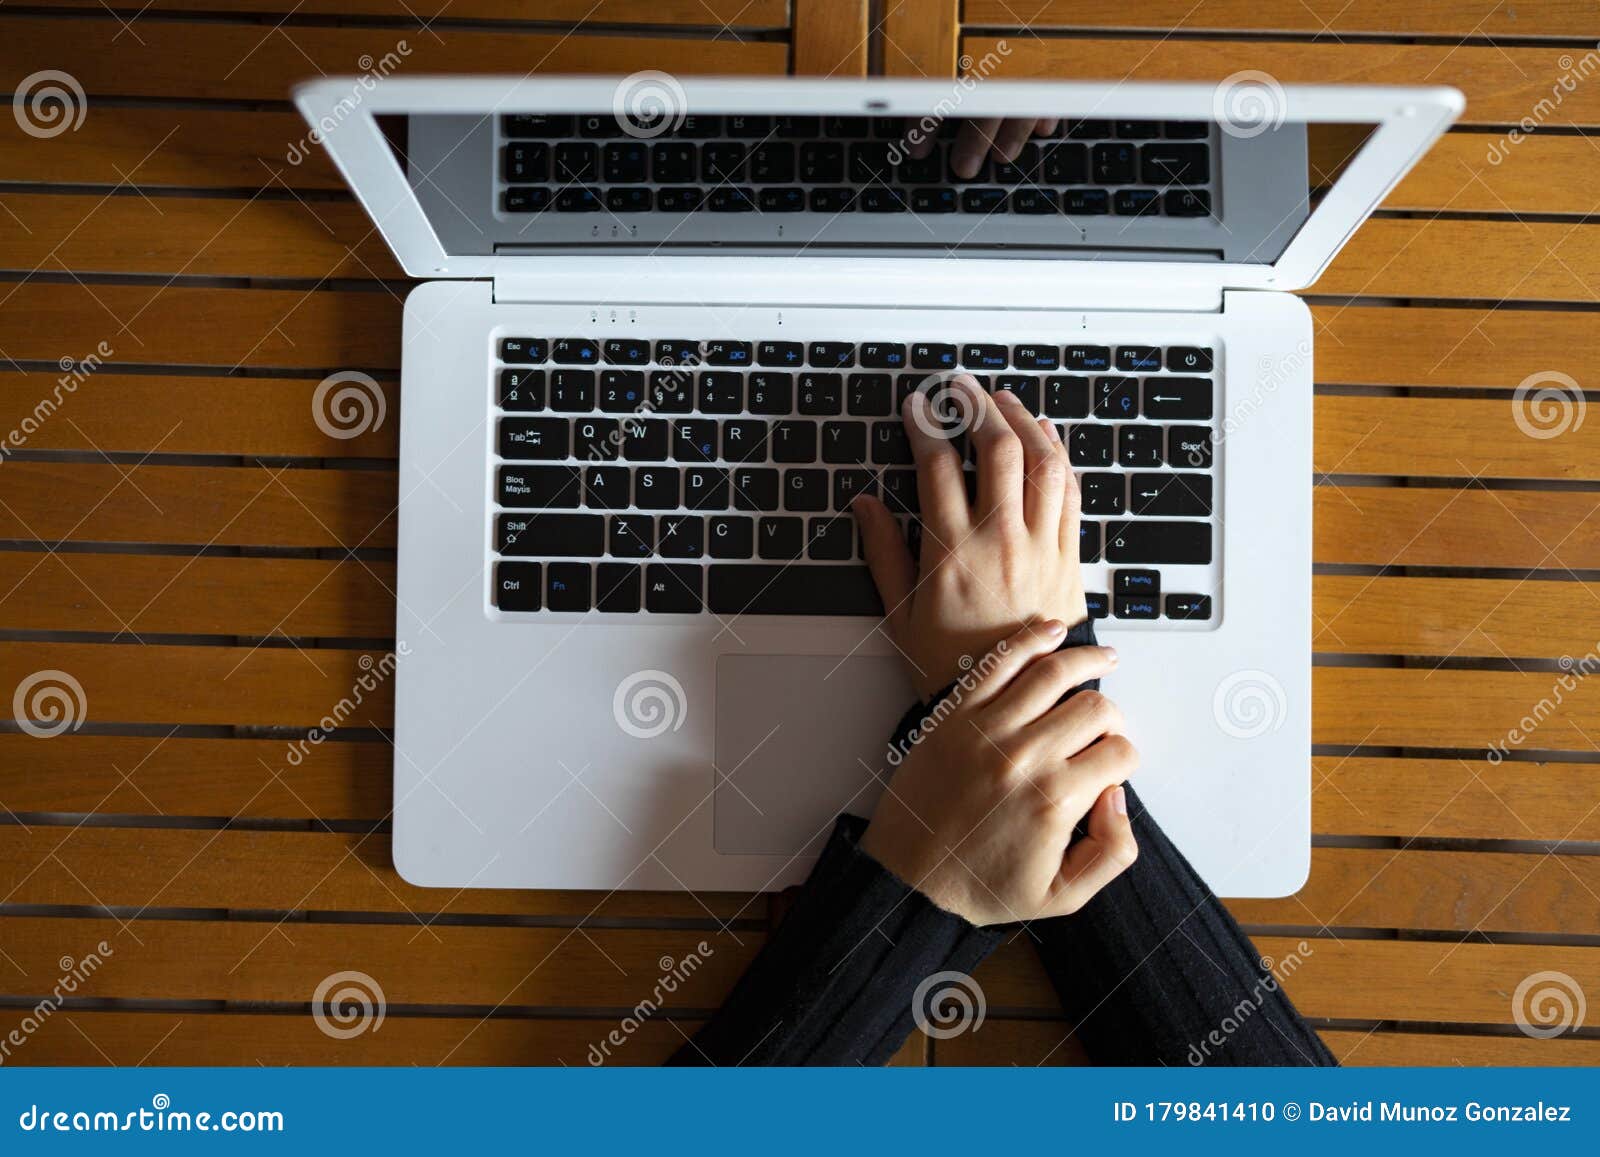 woman with wrist pain from working with the computer